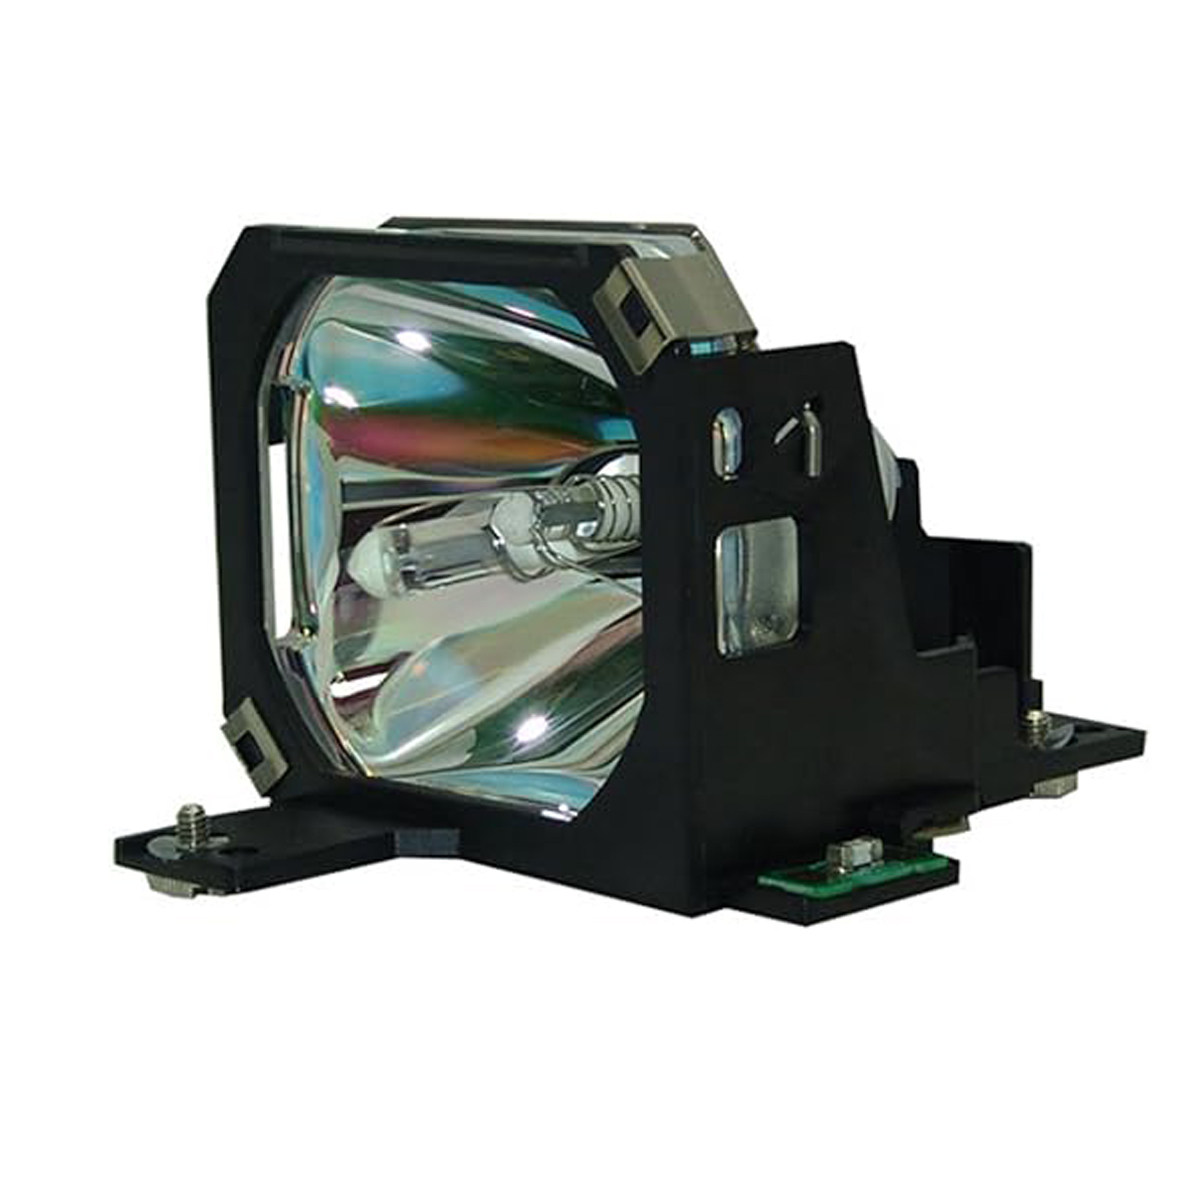 Replacement Projector lamp ELPLP07 For Epson EMP-5550 EMP-7550